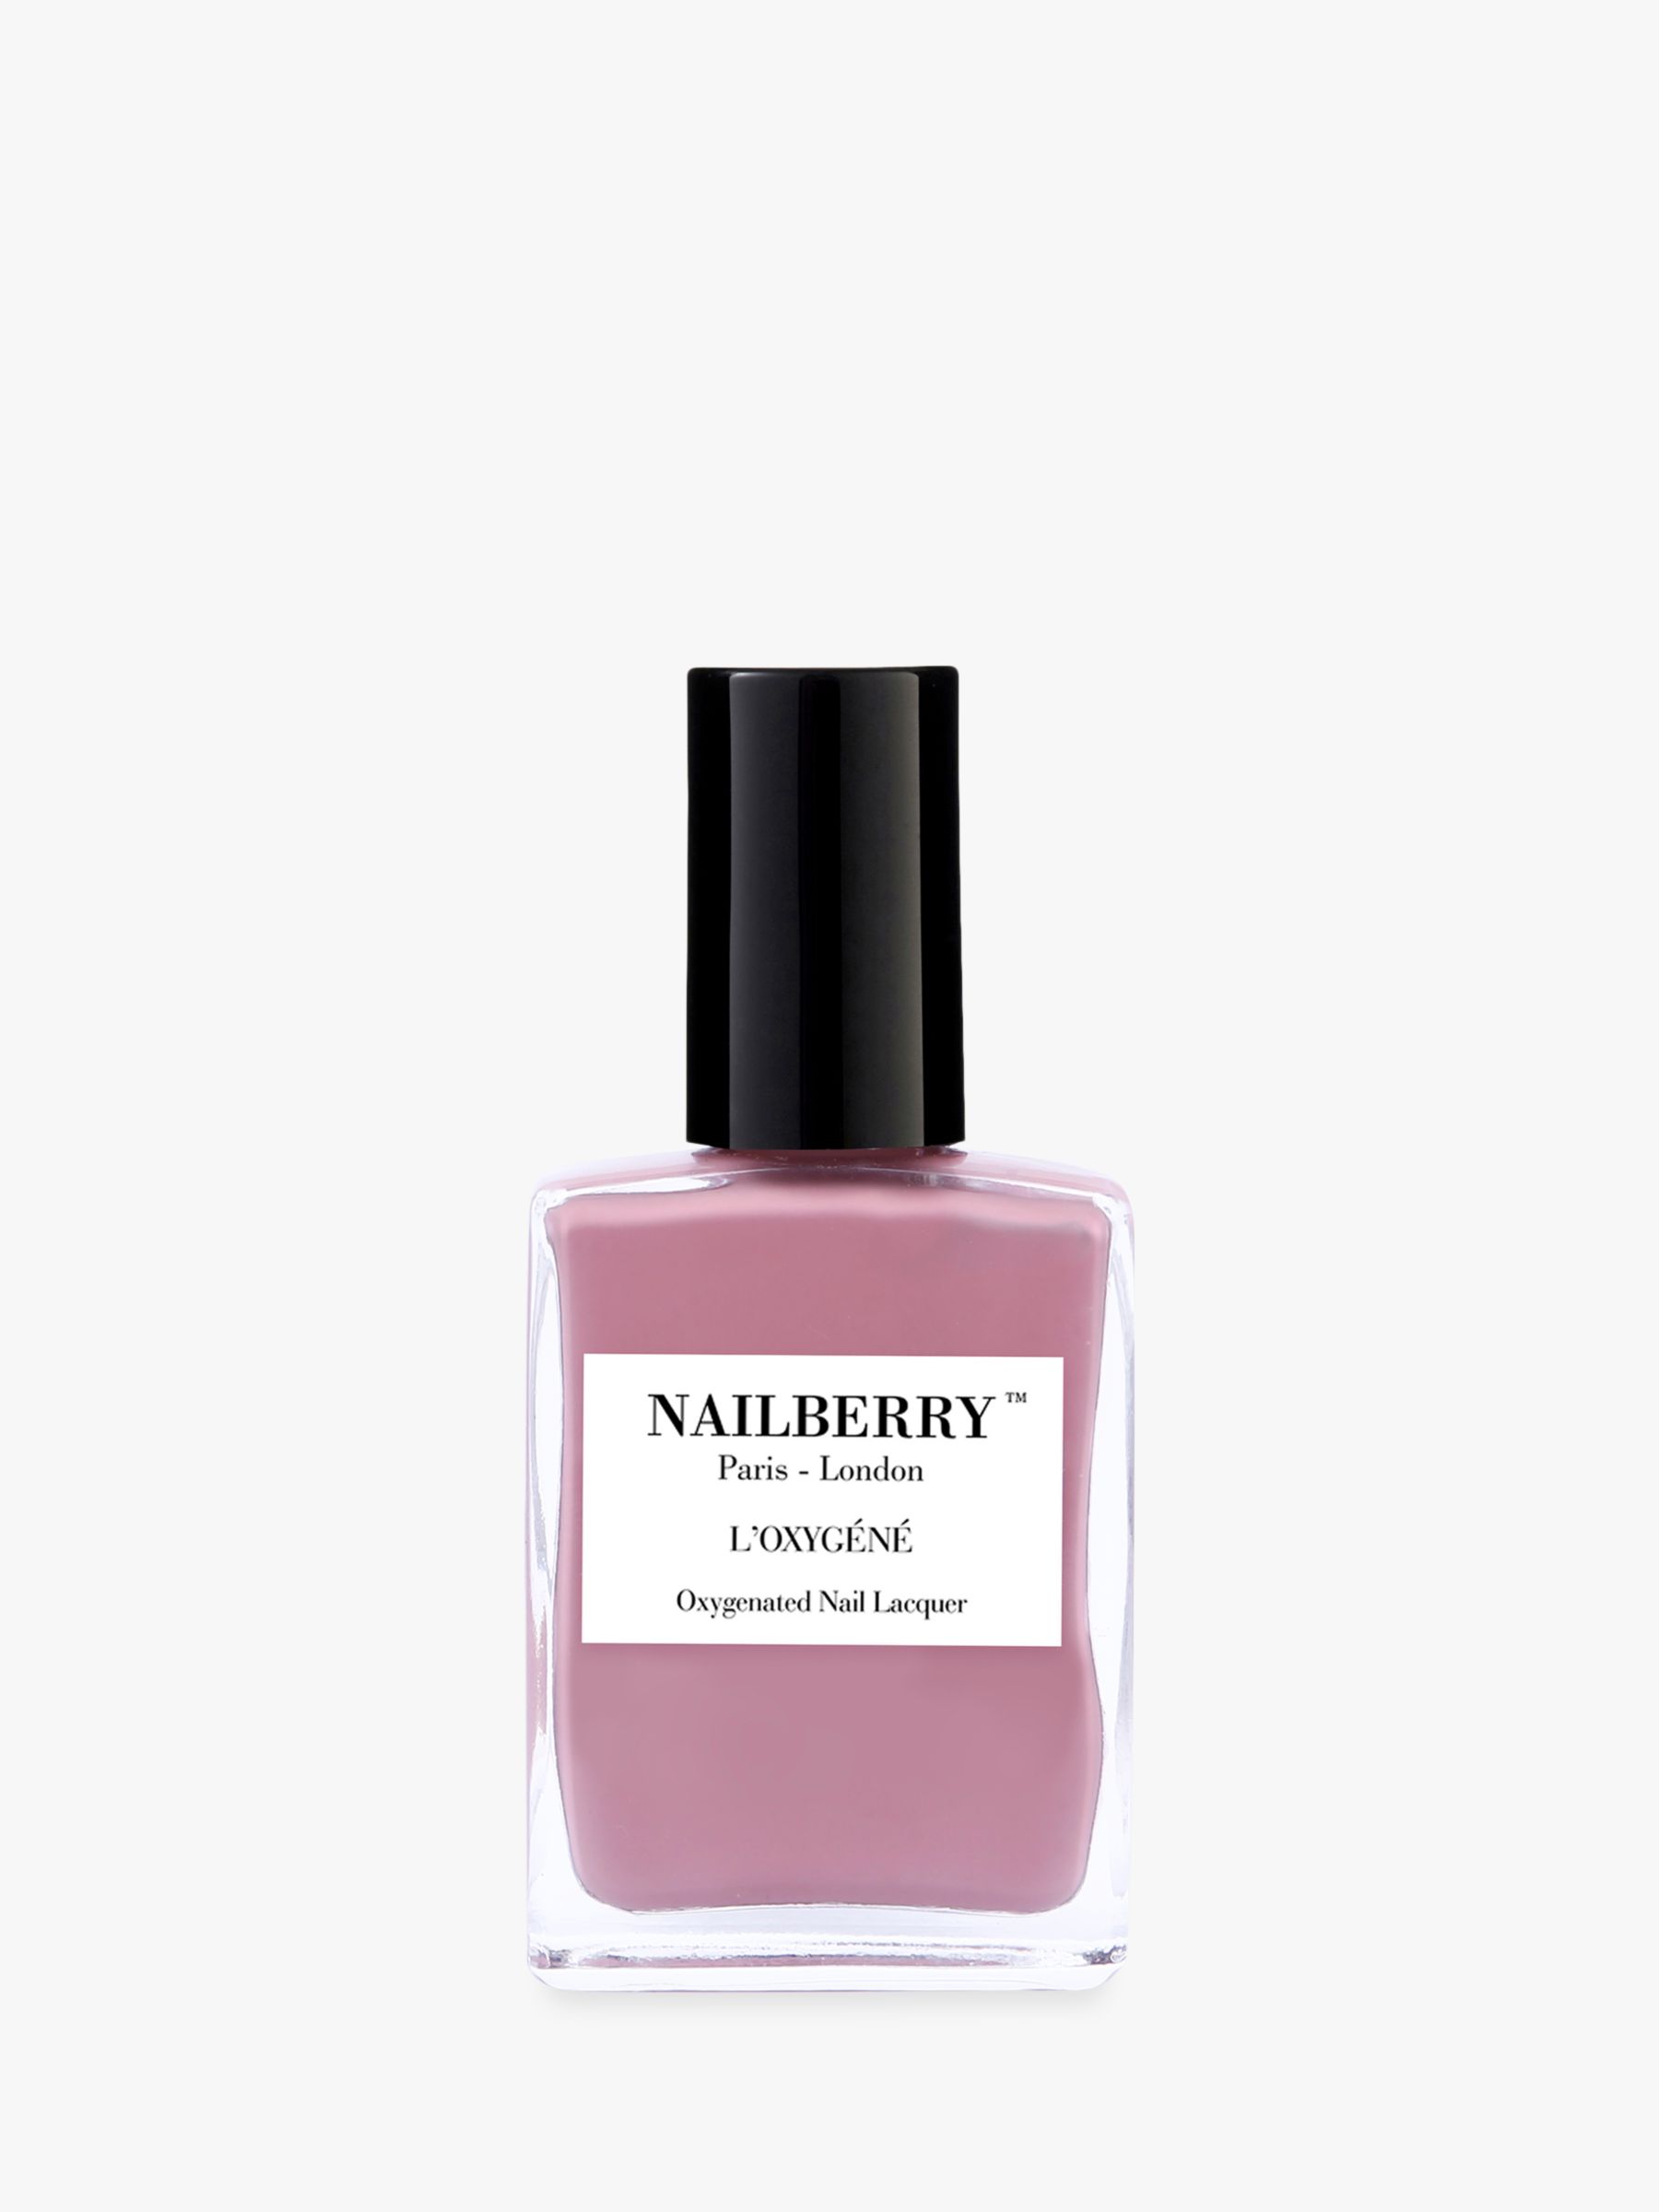 Nailberry L'Oxygéné Oxygenated Nail Lacquer, Love Me Tender 1